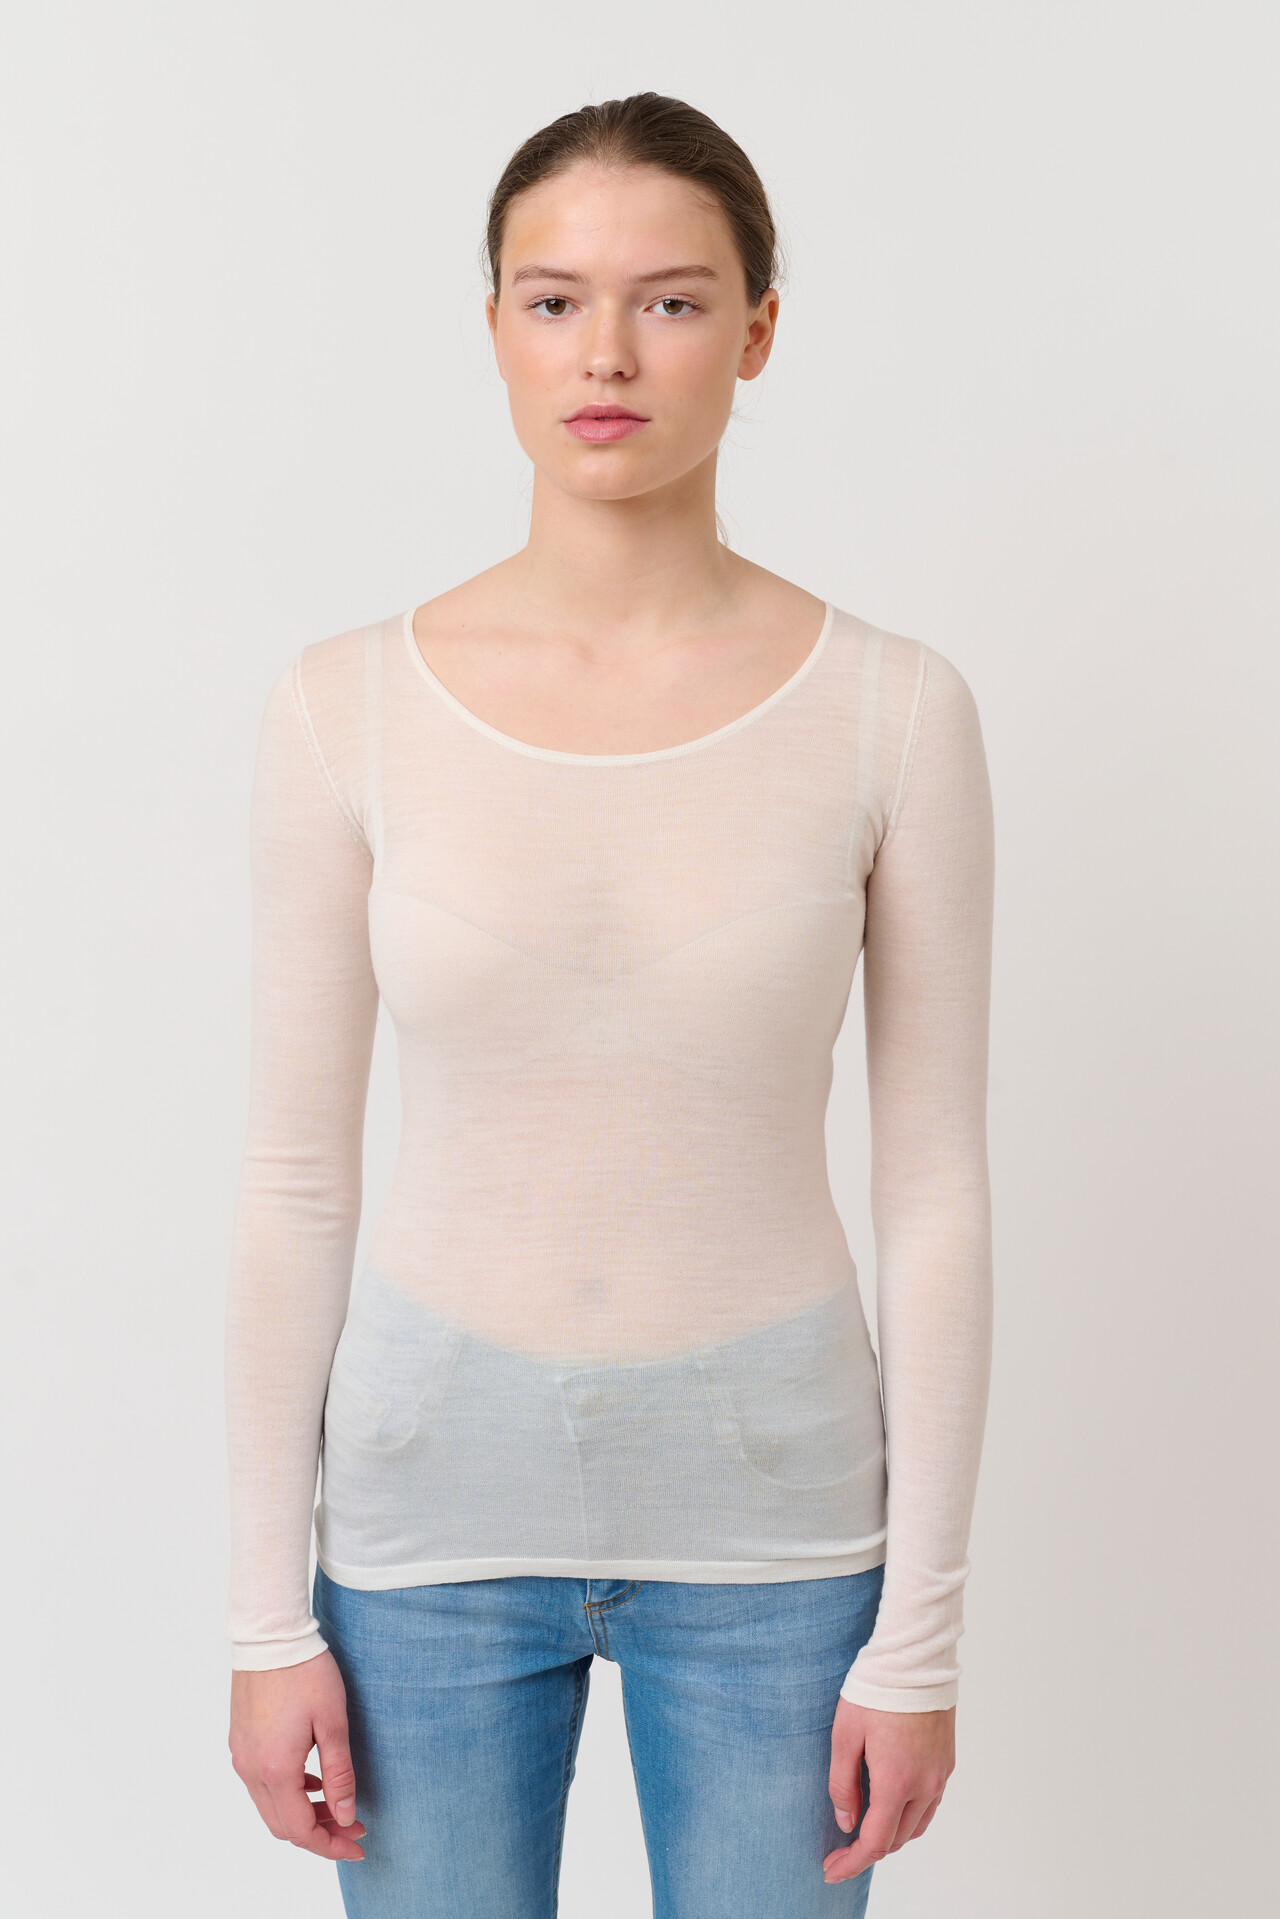 CRÉTON Indie merino bluse (WHITE PEARL S)